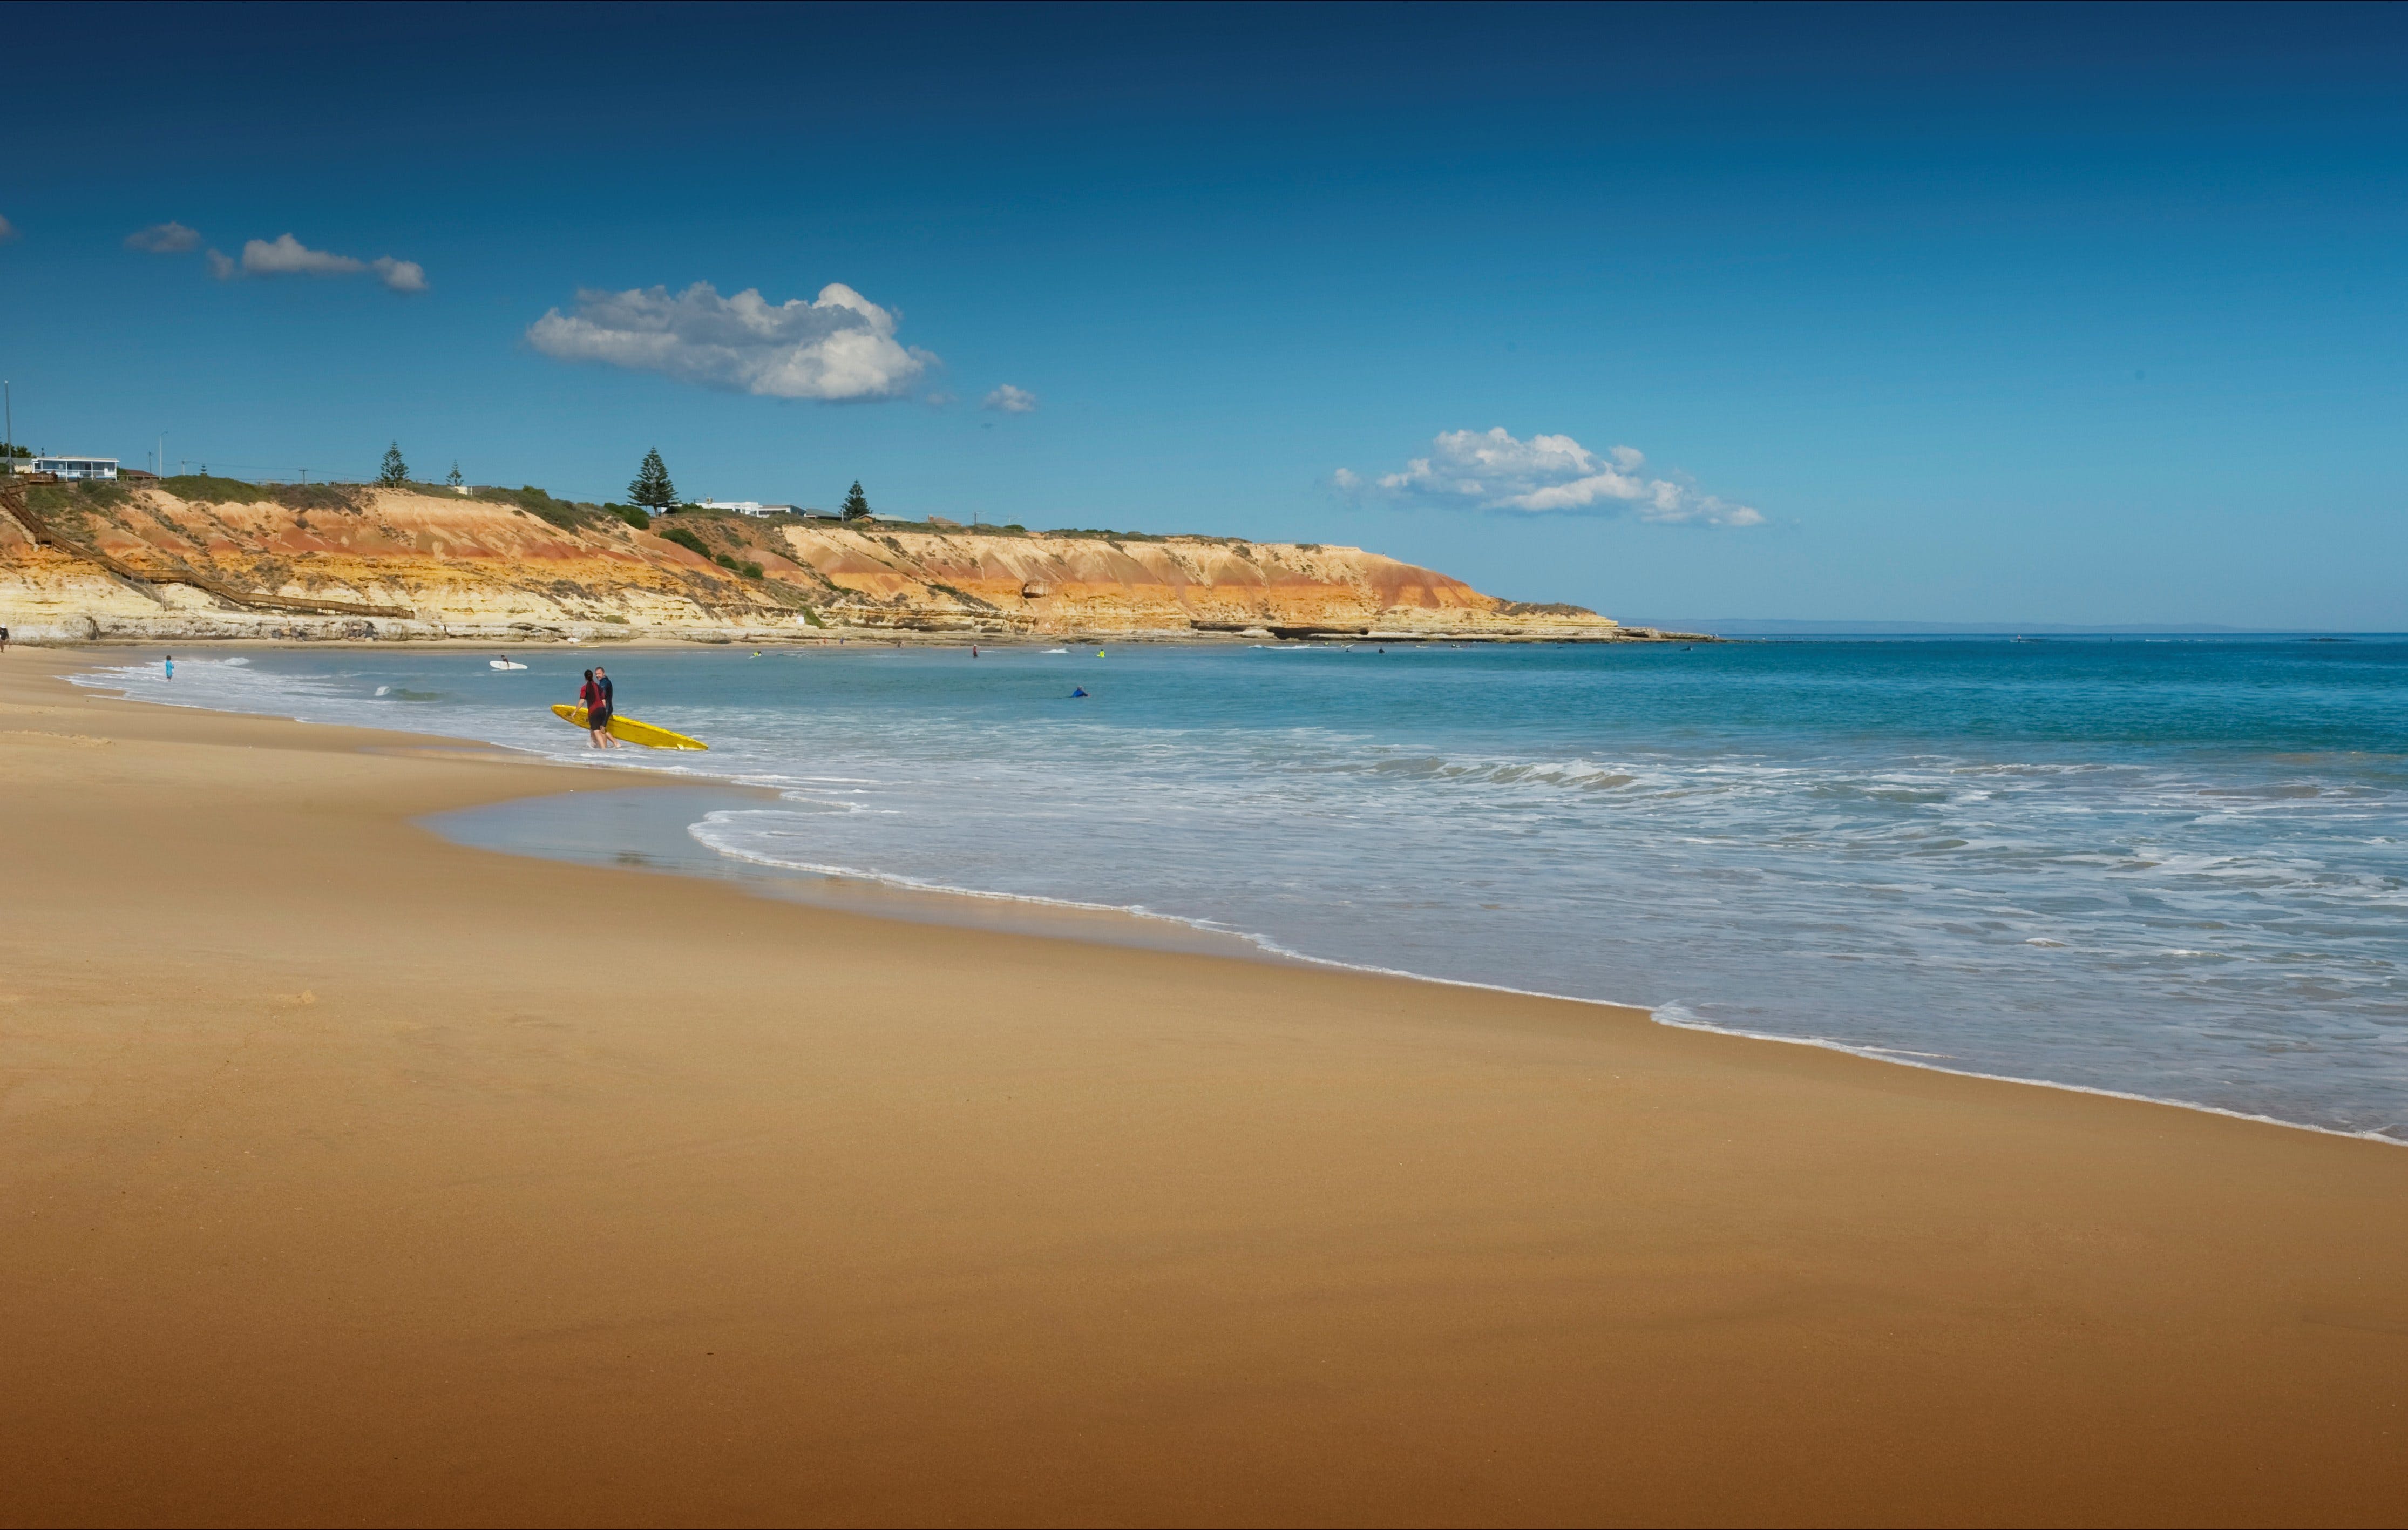 Port Noarlunga Beach Jetty Reef and Aquatic Trail - Find Attractions